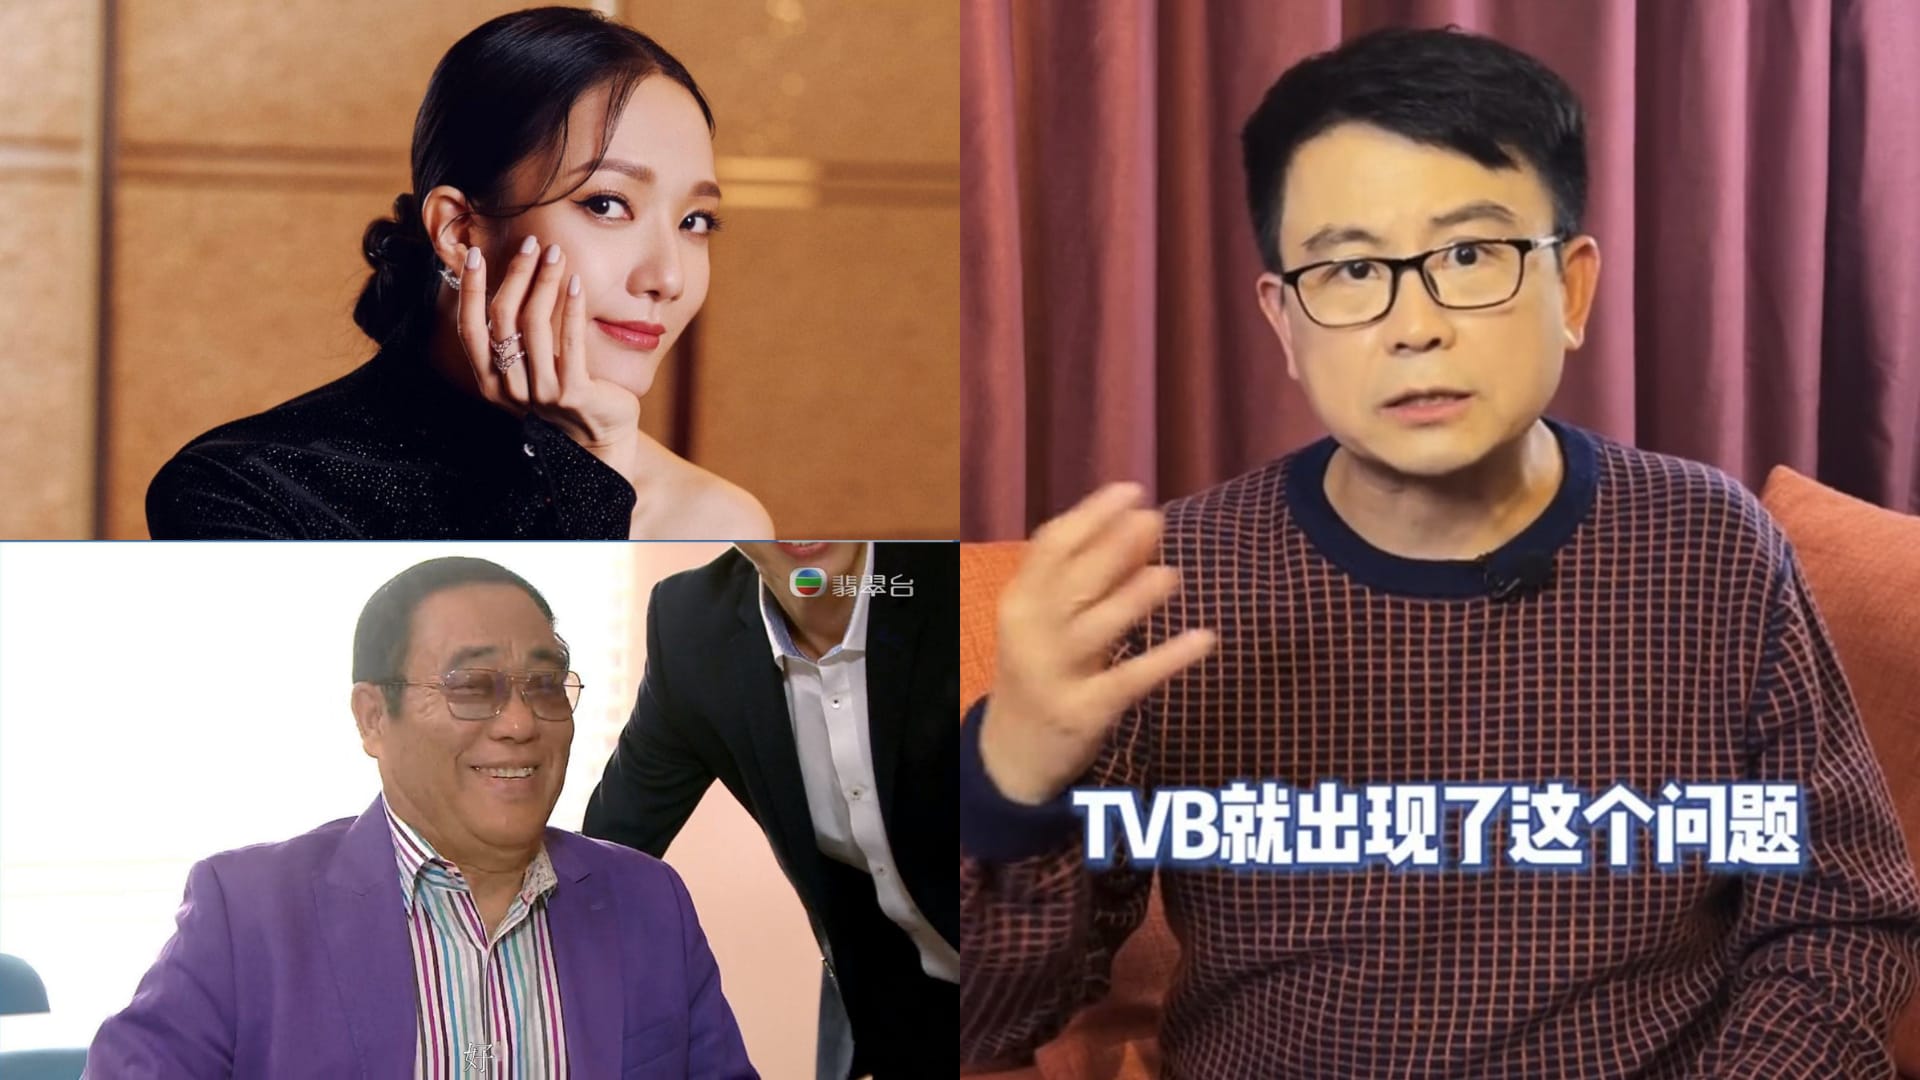 7 Artistes Left TVB In The Past Month; Former TVB Actor Gabriel Wong Says The Company Created This Problem For Itself